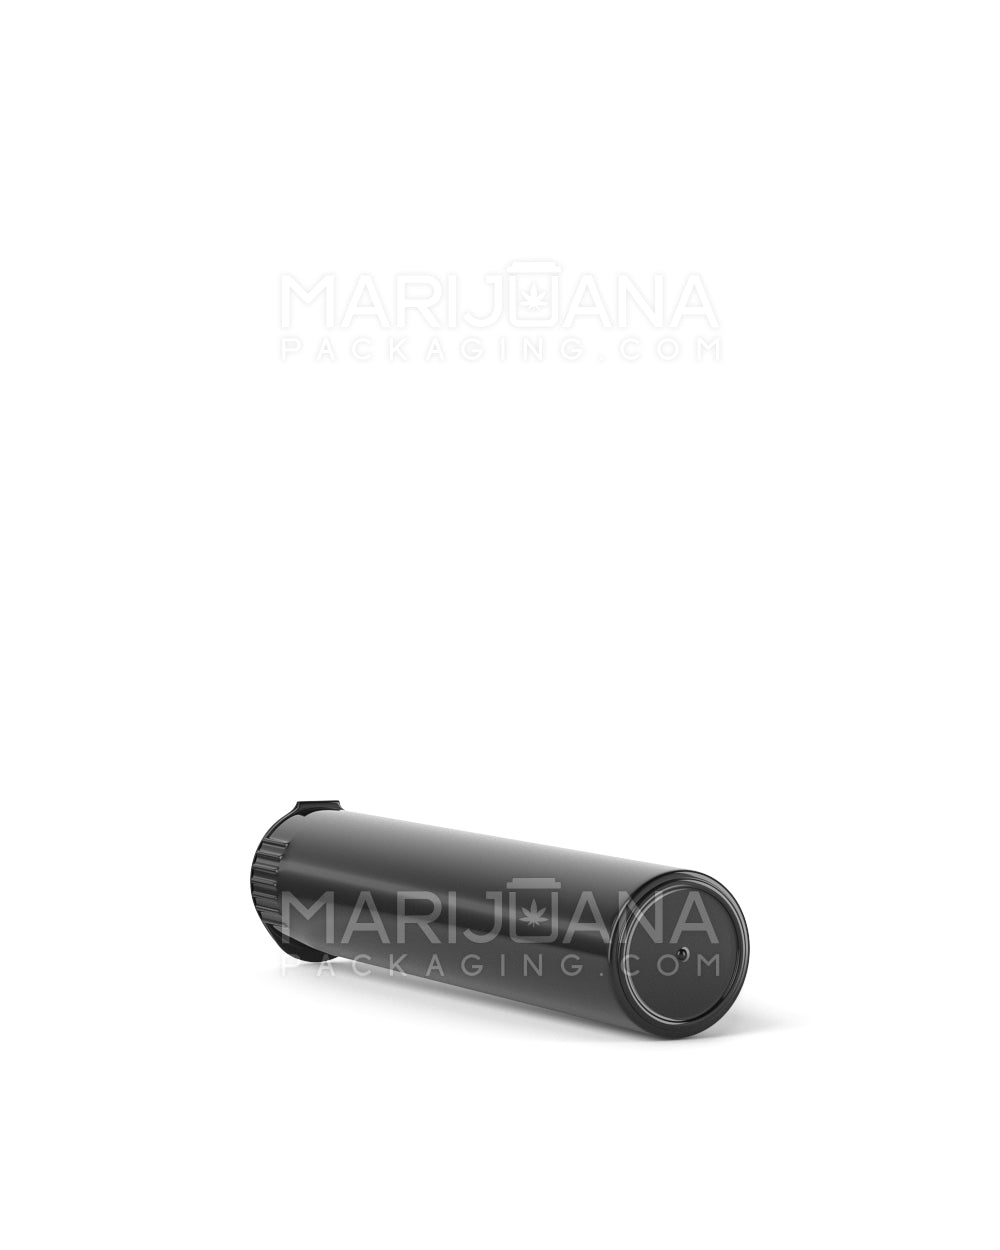 90mm Black Child-Resistant Pre-Roll Tubes – 1000 Count